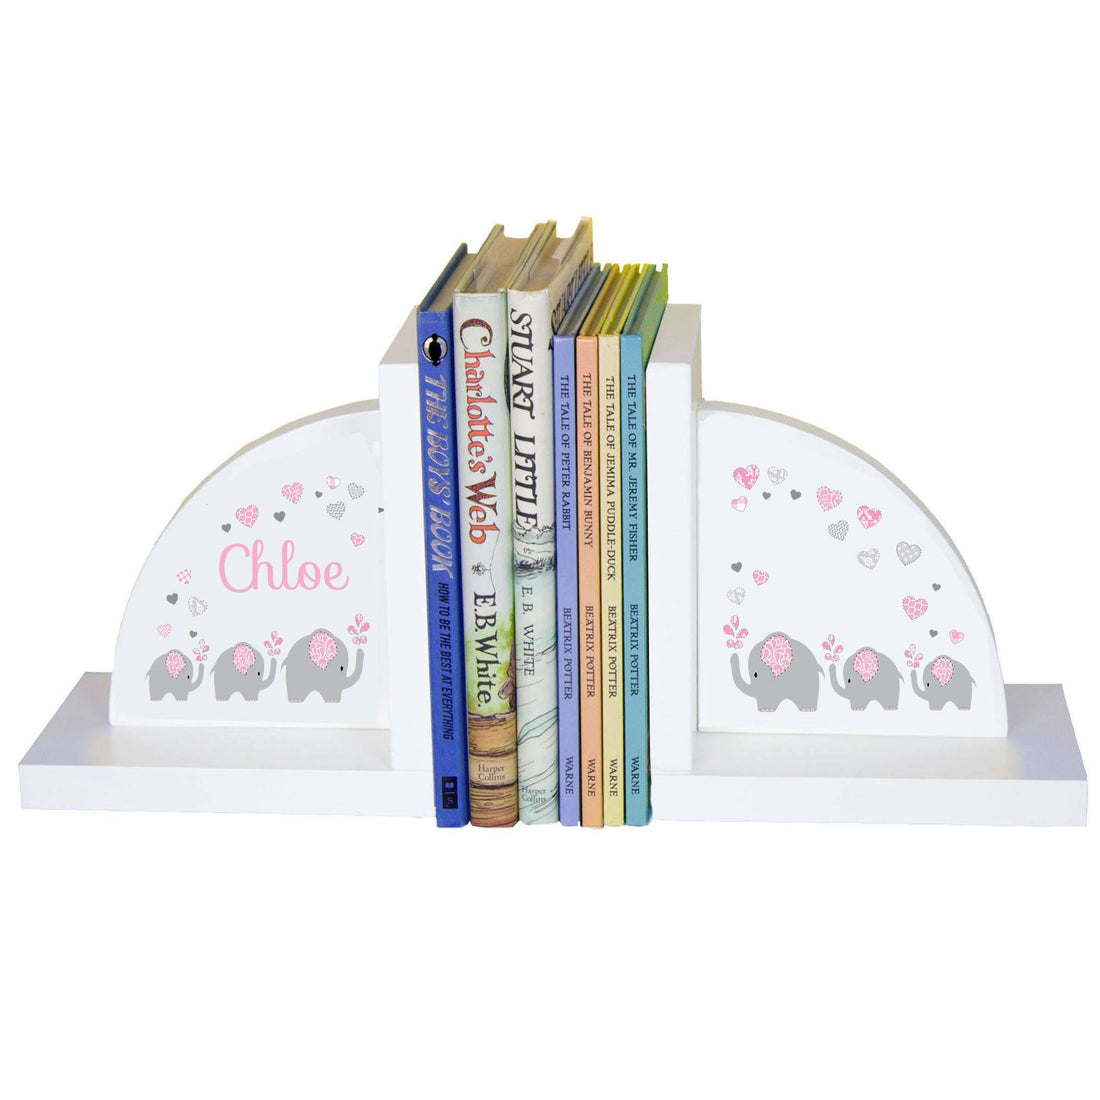 Personalized White Bookends with Pink Elephant design